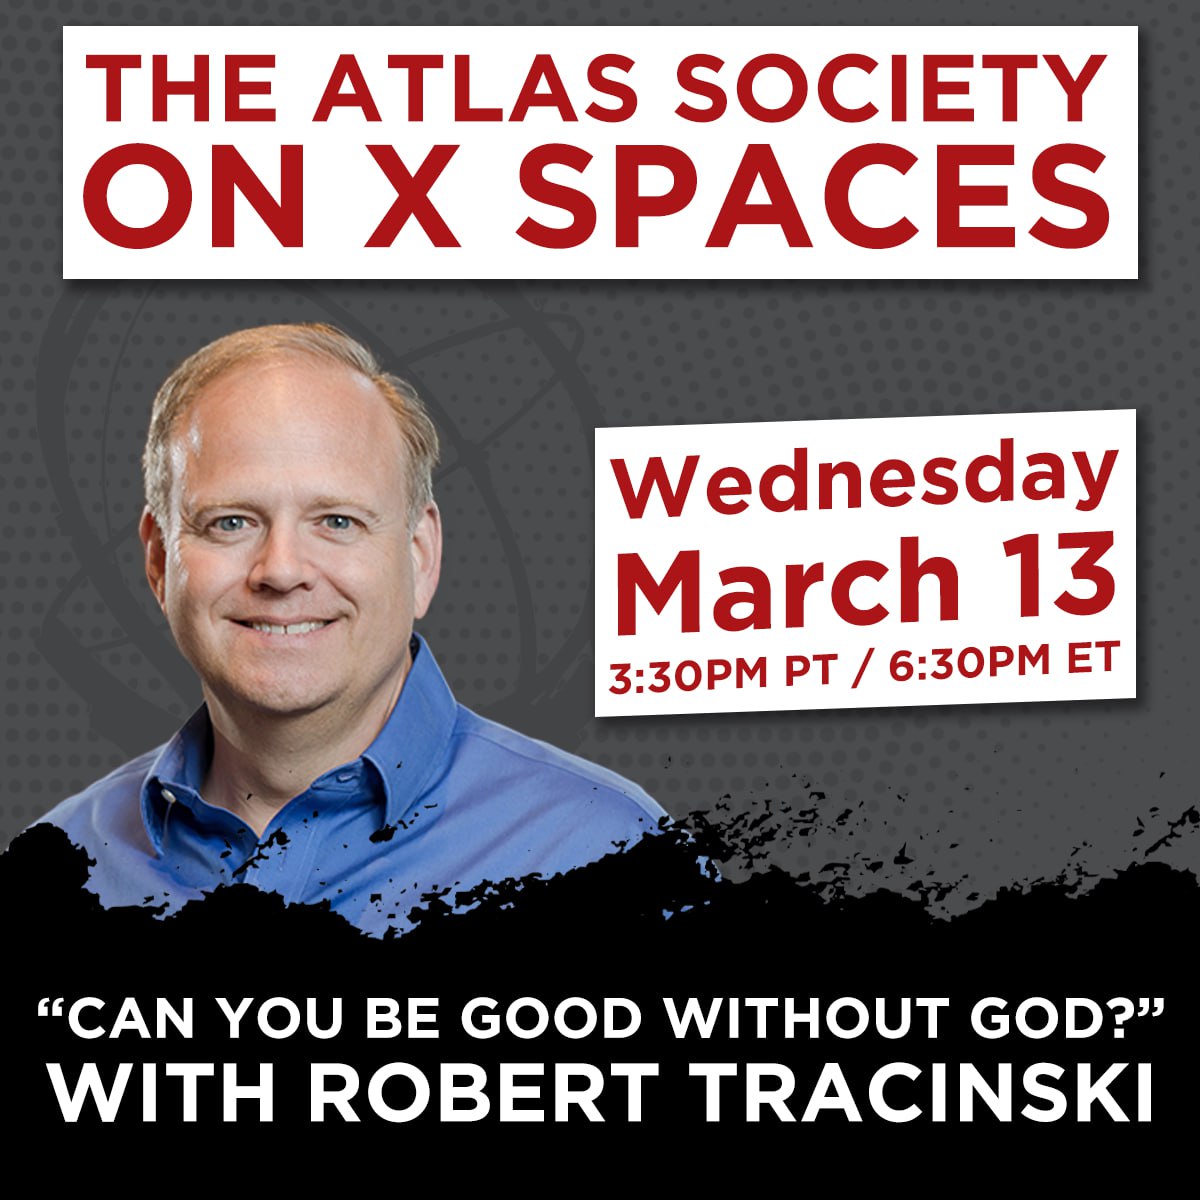 Can You Be Good Without God? with Robert Tracinski